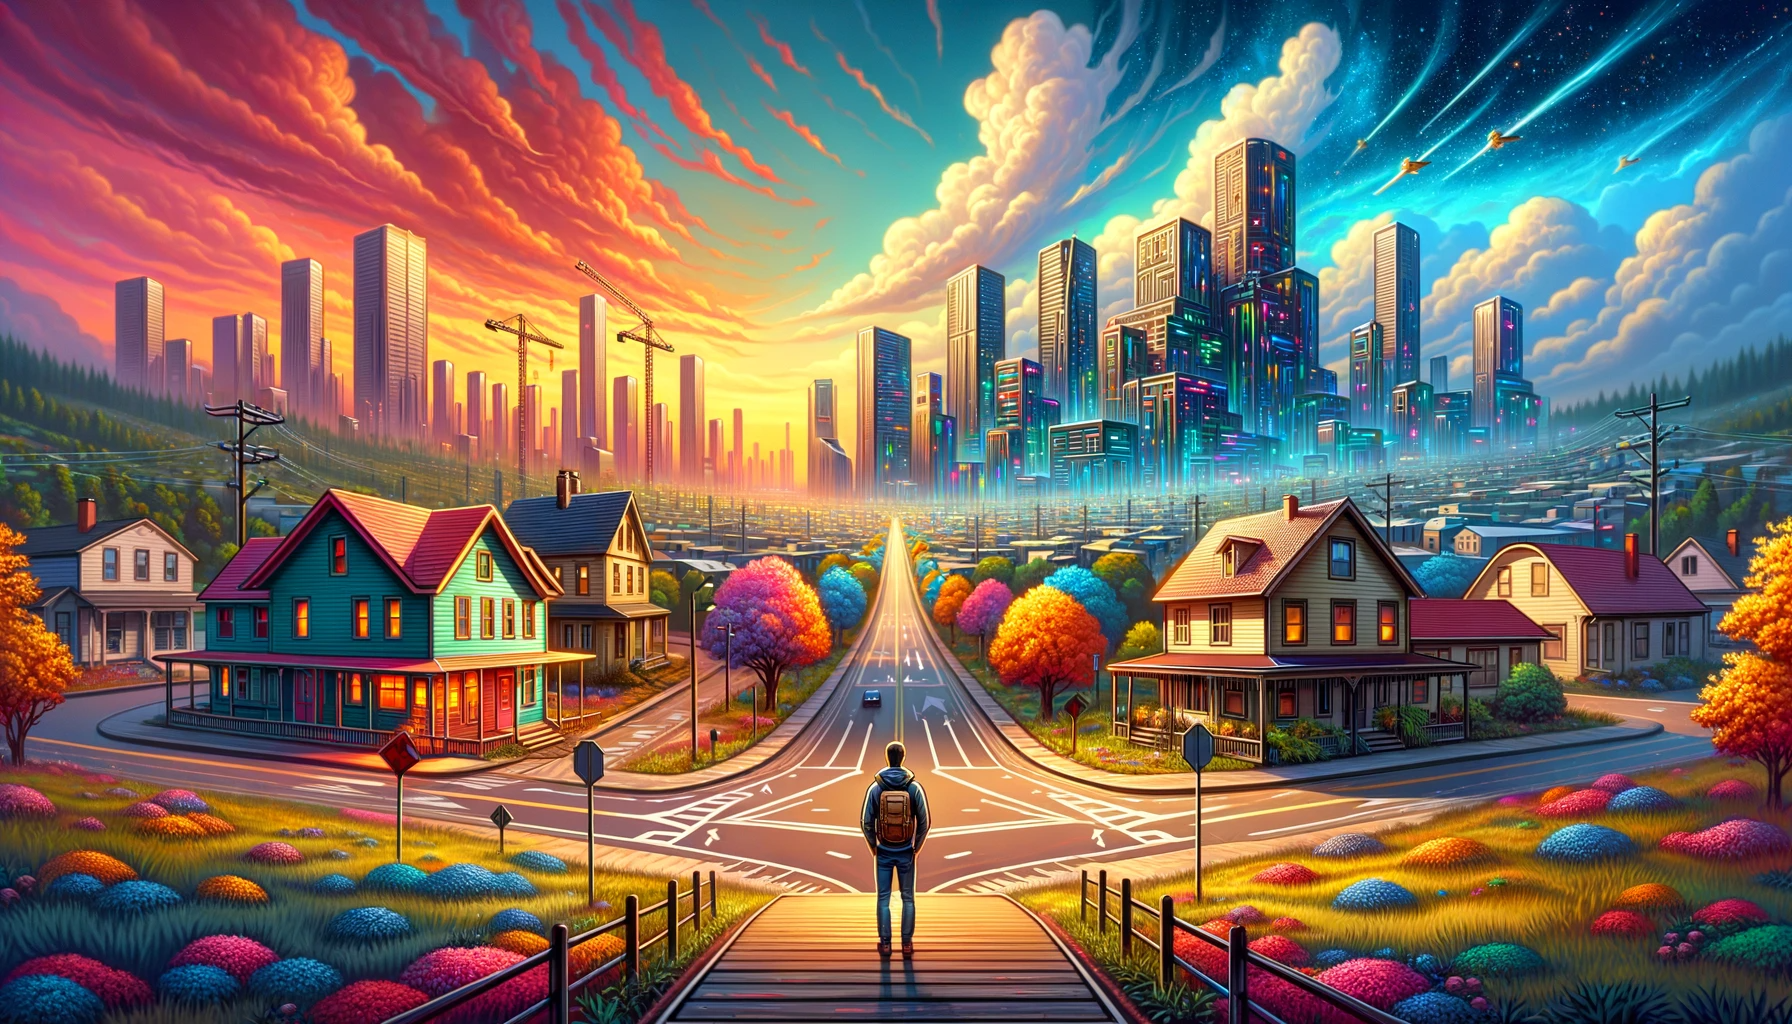 A wide, landscape-oriented image featuring a traveler at a pivotal crossroads under bright, colorful skies. The background shows a cozy suburban neighborhood with charming houses and small streets bustling with people, symbolizing the tool 'Pandas.' This area radiates warmth, comfort, and familiarity. To the left, a path leads towards a modern cityscape representing 'Apache Spark,' with towering skyscrapers, cranes, and construction, indicating power, heavy loads, and complexity. The atmosphere is dynamic but intimidating. To the right, another path leads to a futuristic city, embodying 'DuckDB.' This city showcases sleek, streamlined structures and advanced technology, blending efficiency with high performance. In the center, a figure of a traveler stands at the crossroads, contemplating the paths ahead, symbolizing the decision-making process of data engineers. The overall scene is optimistic, highlighting the exciting possibilities of each tool in data engineering.